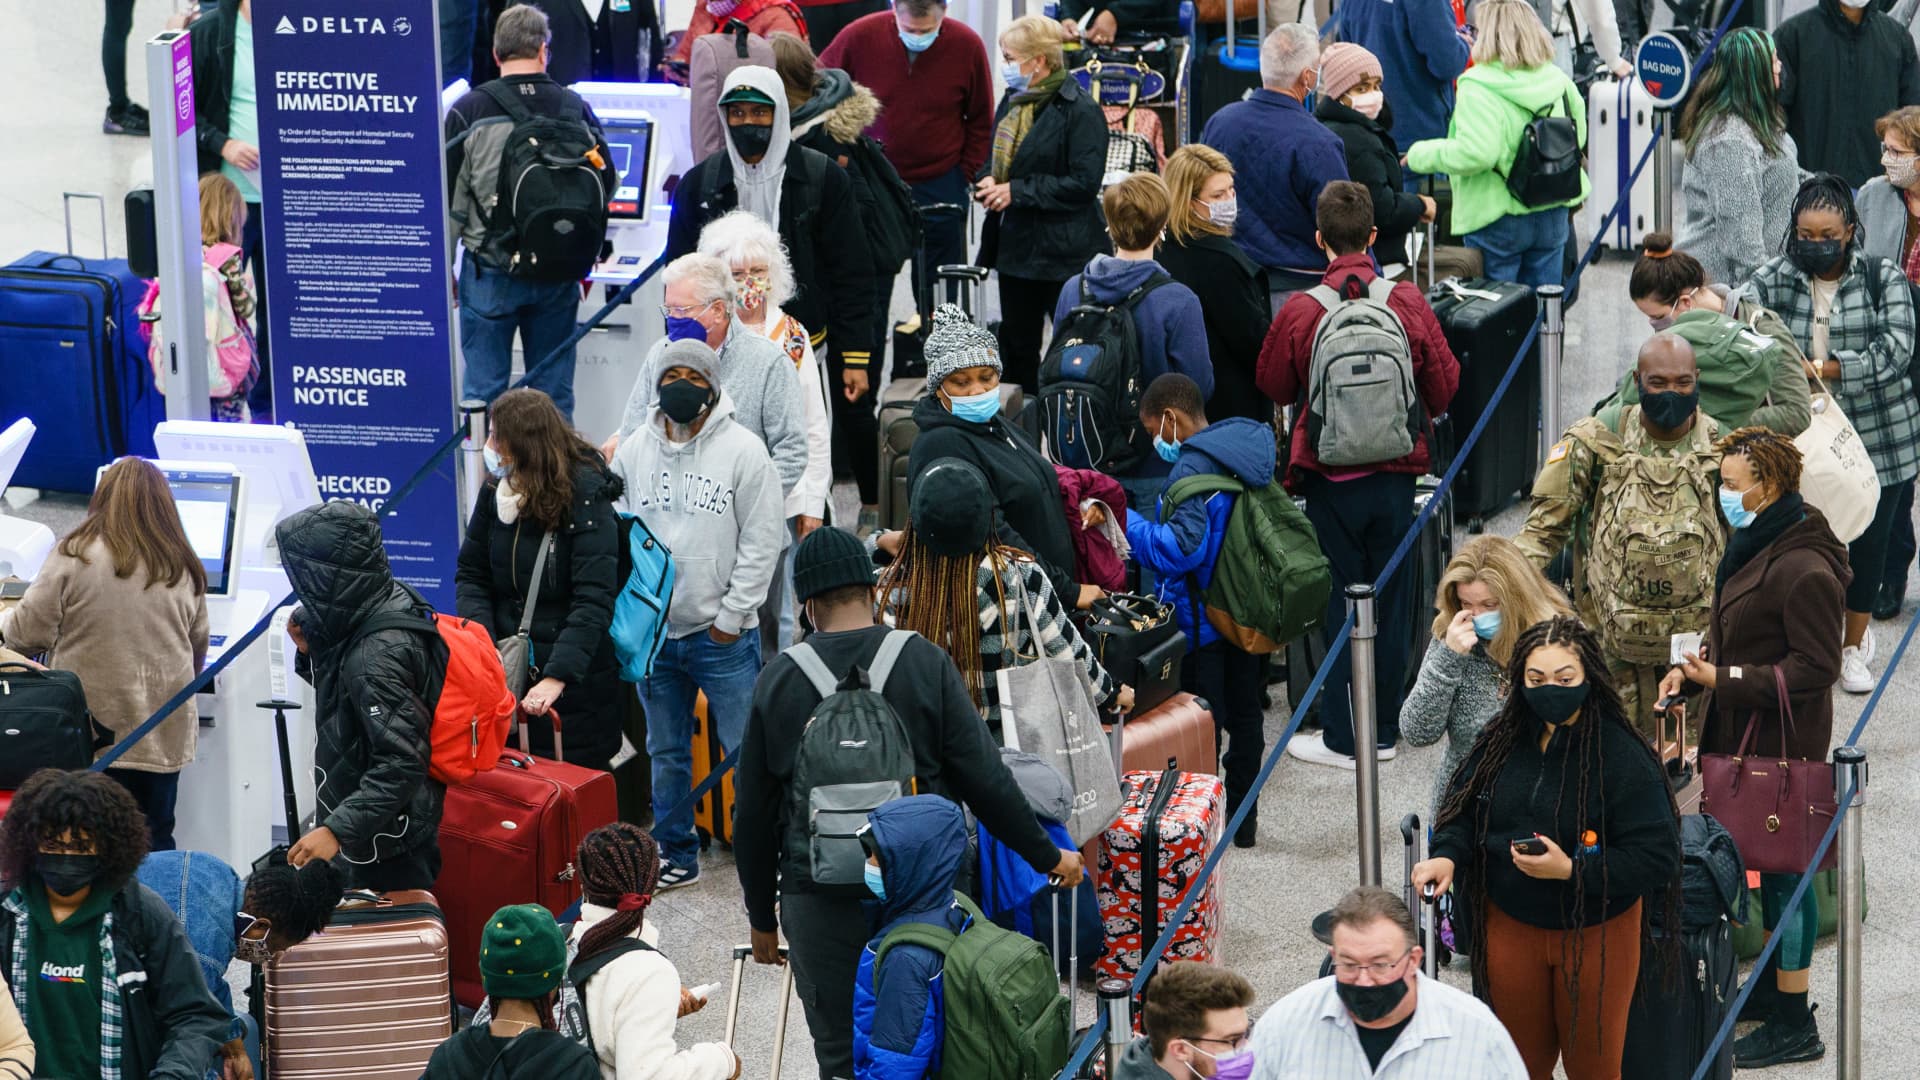 Airfare surged 20% over pre-pandemic levels as inflation hit vacations